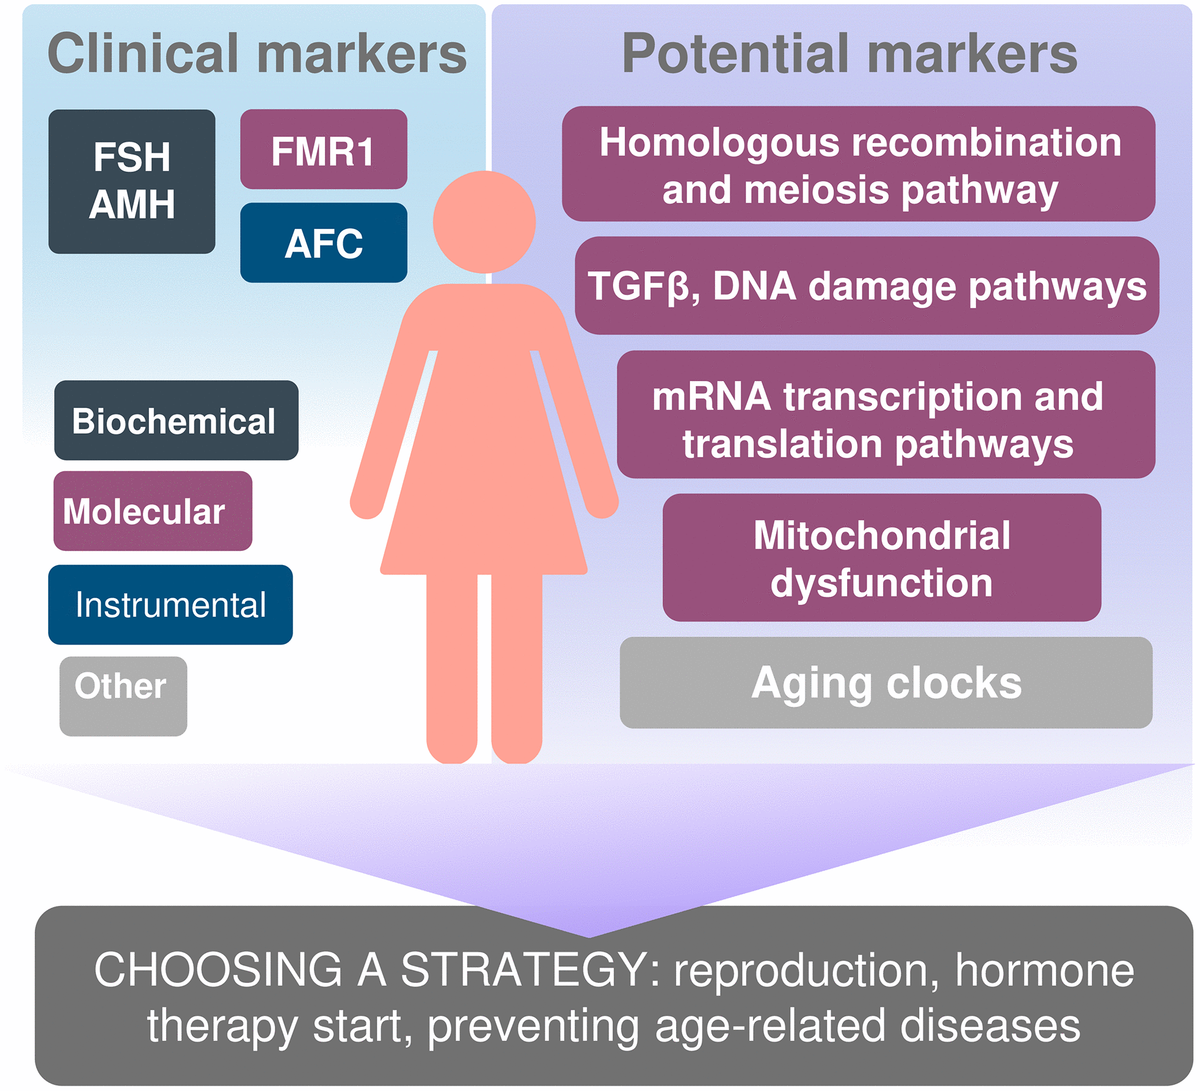 Biomarkers of reproductive and somatic aging ana personification the approach to managing patients.